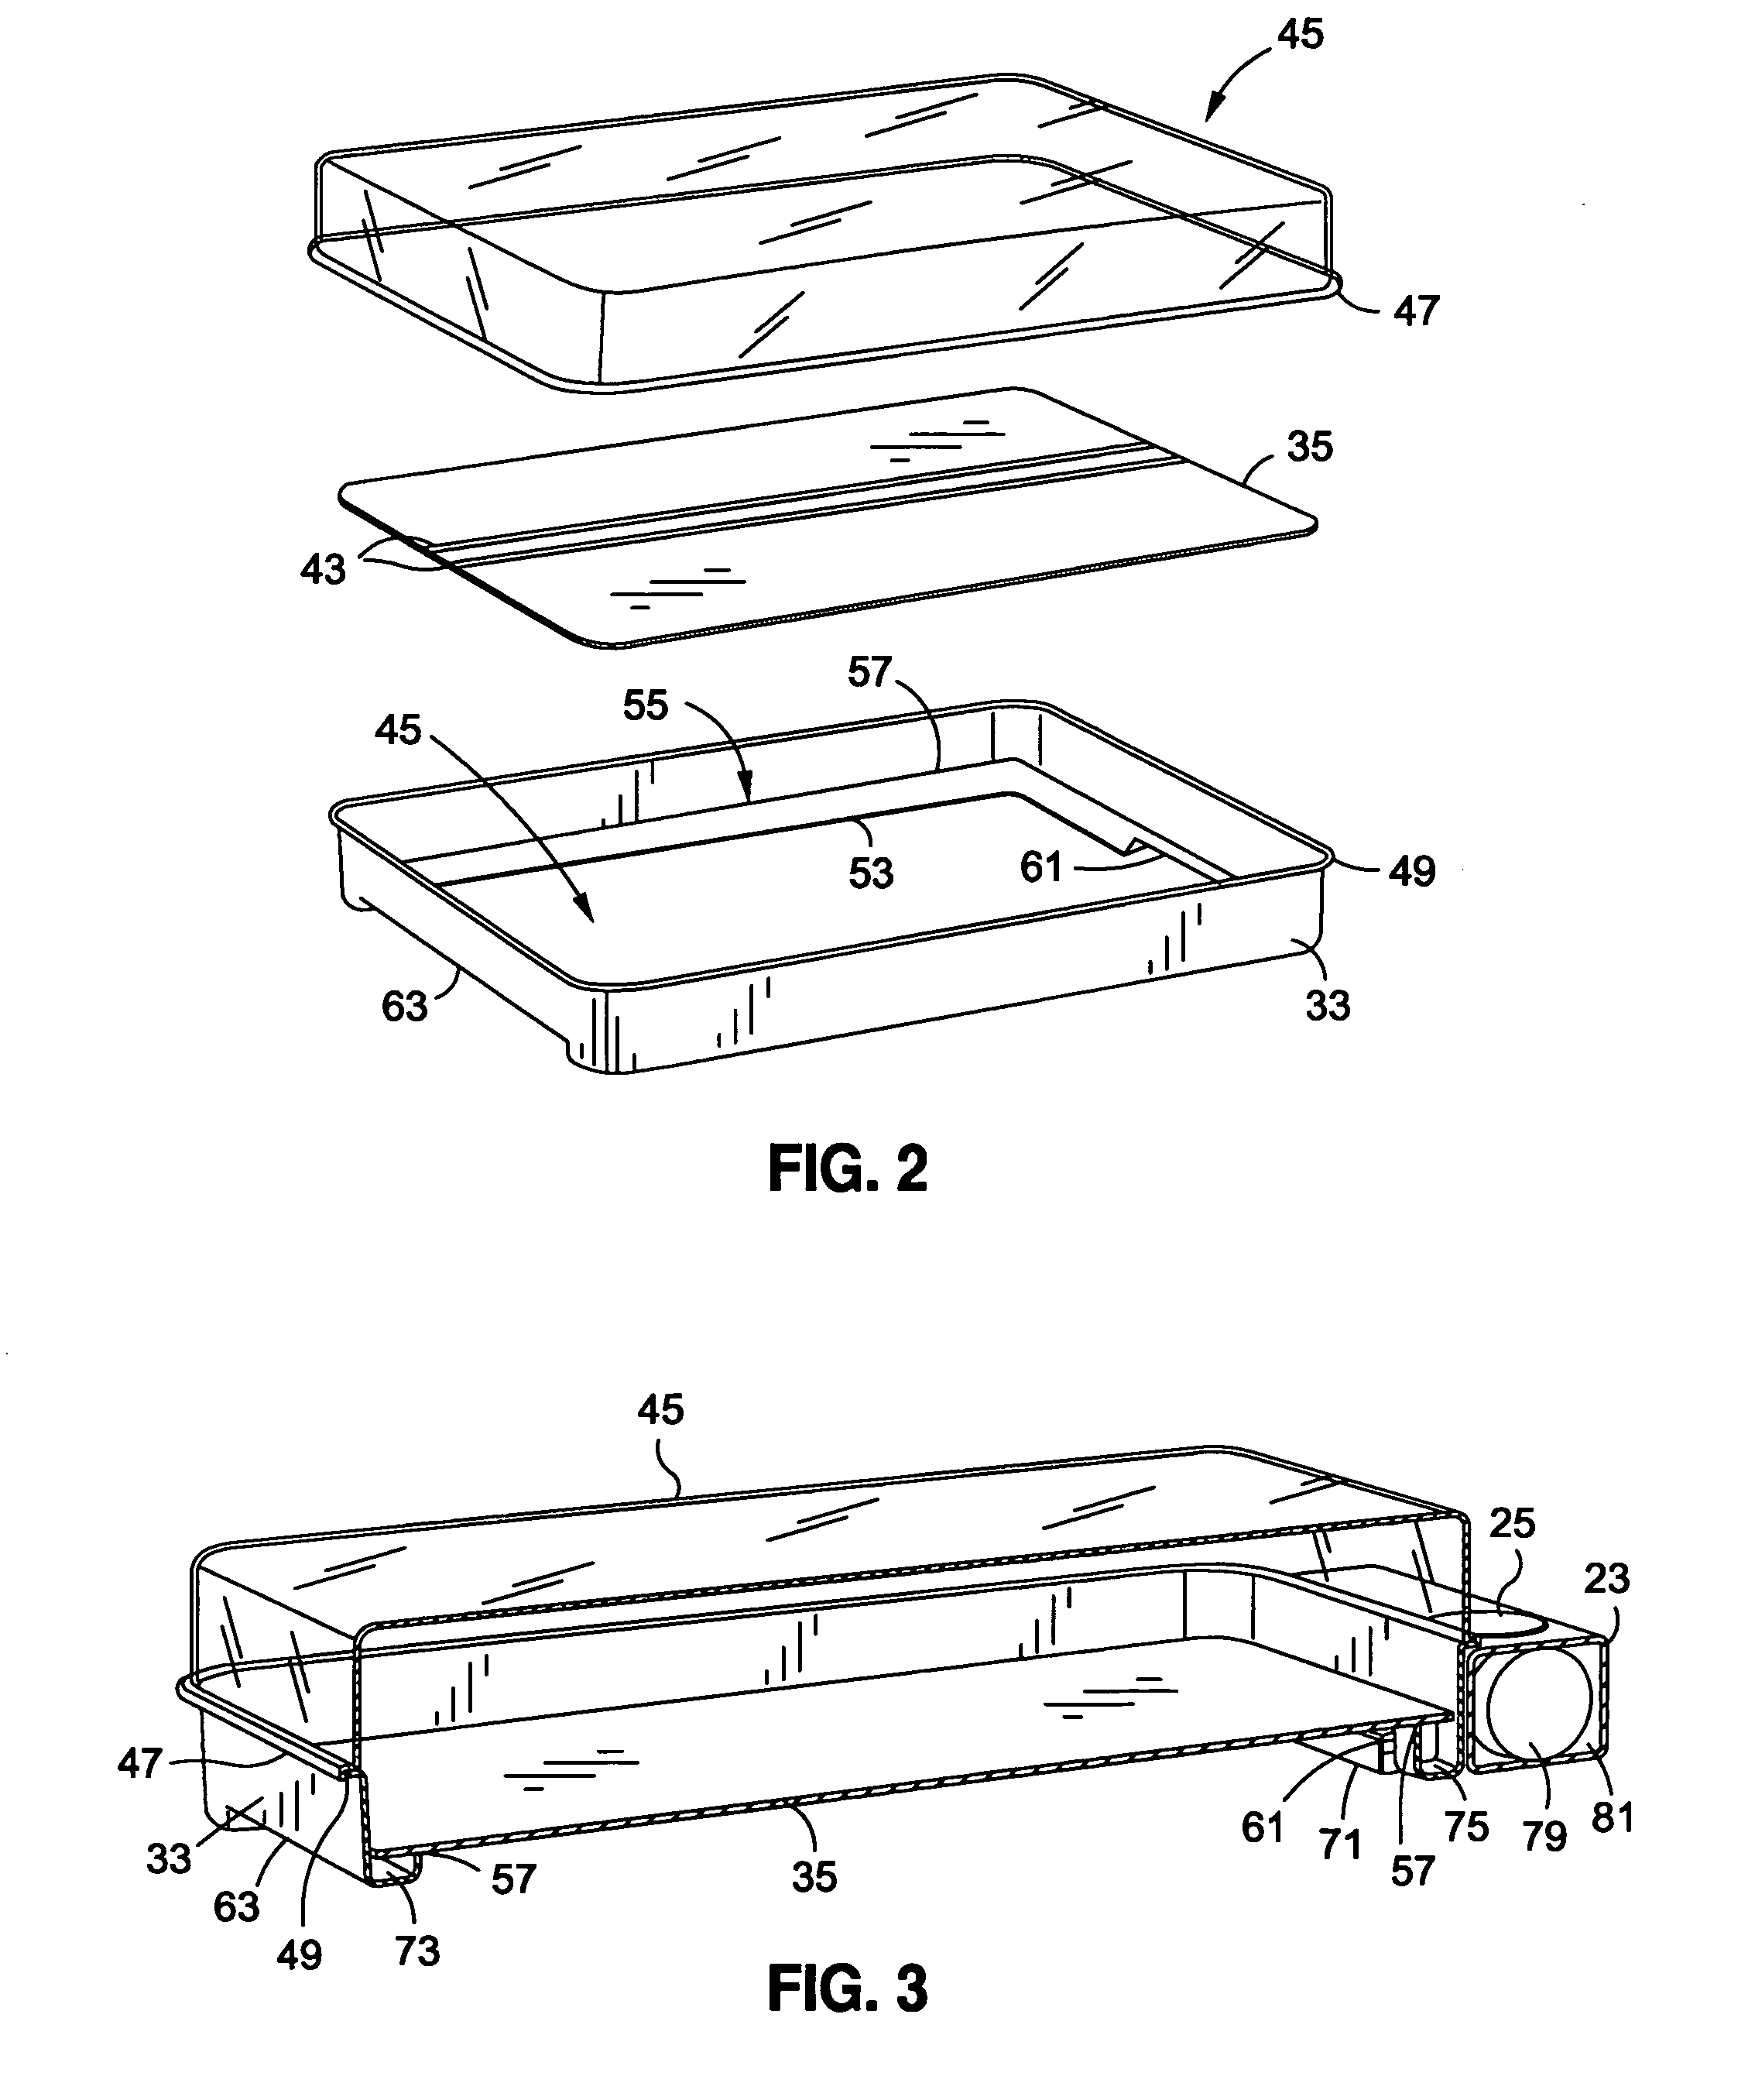 Thaw plate system